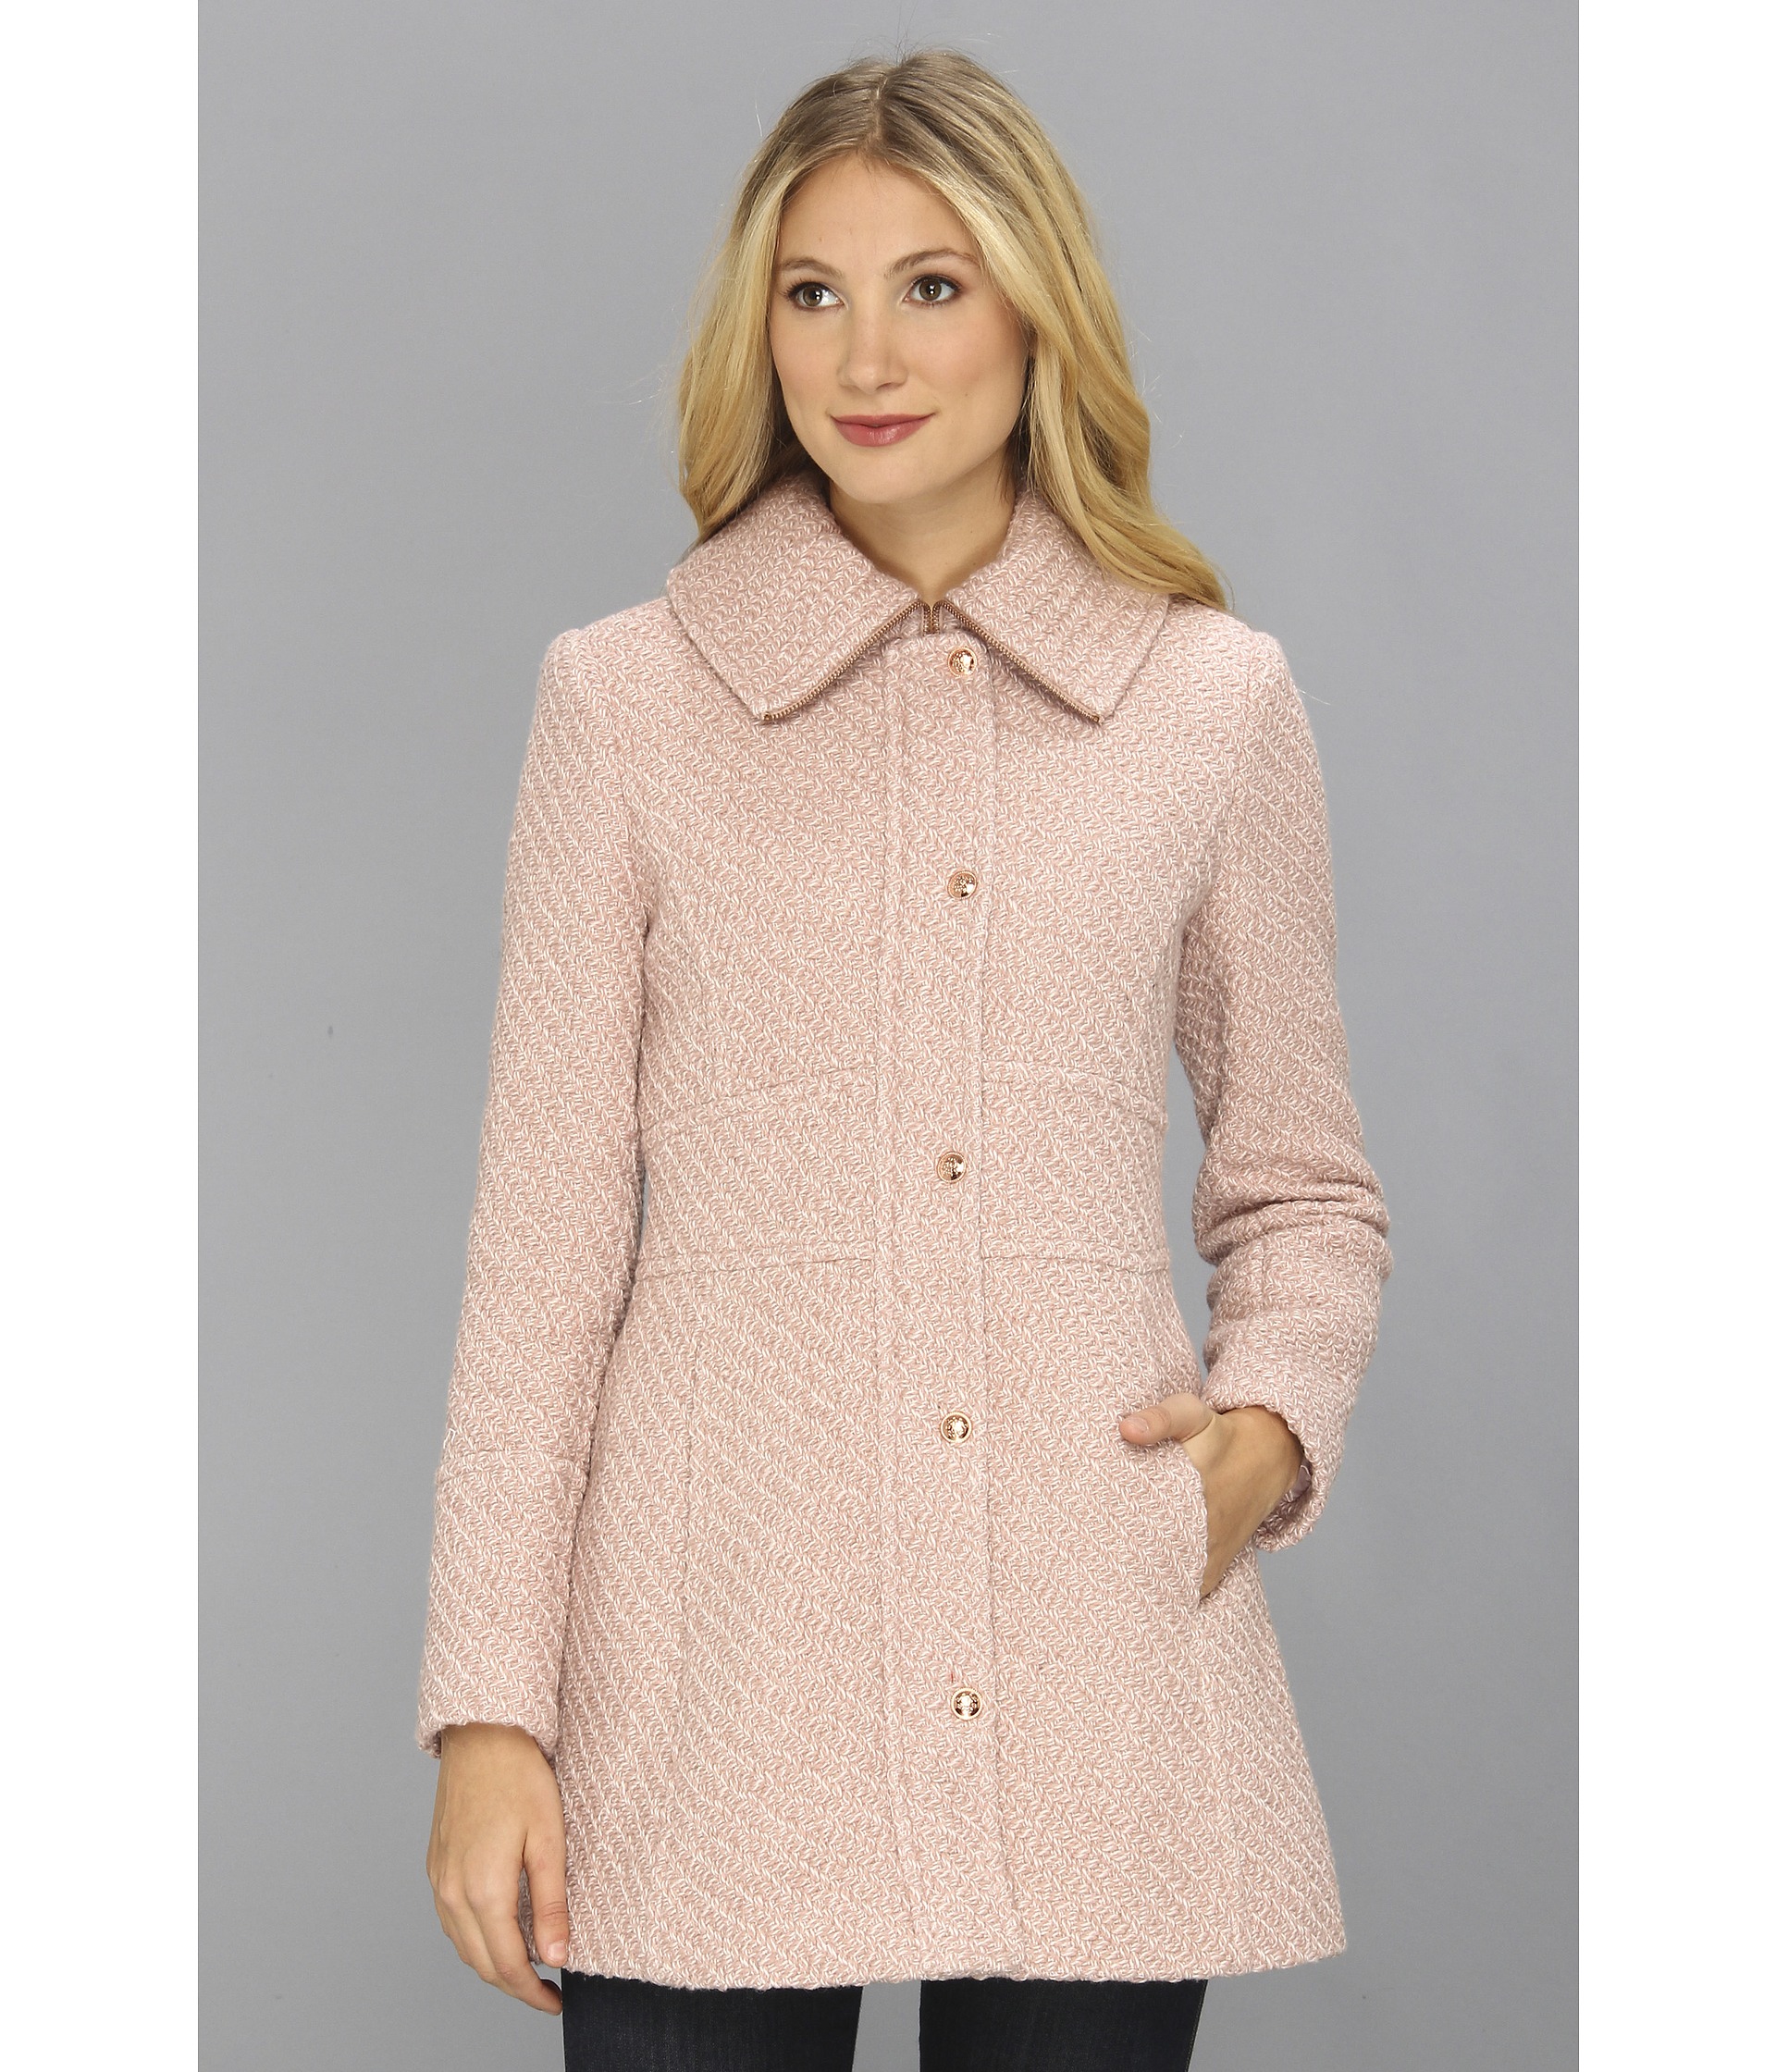 Jessica Simpson Textured Wool Coat | Shipped Free at Zappos1920 x 2240